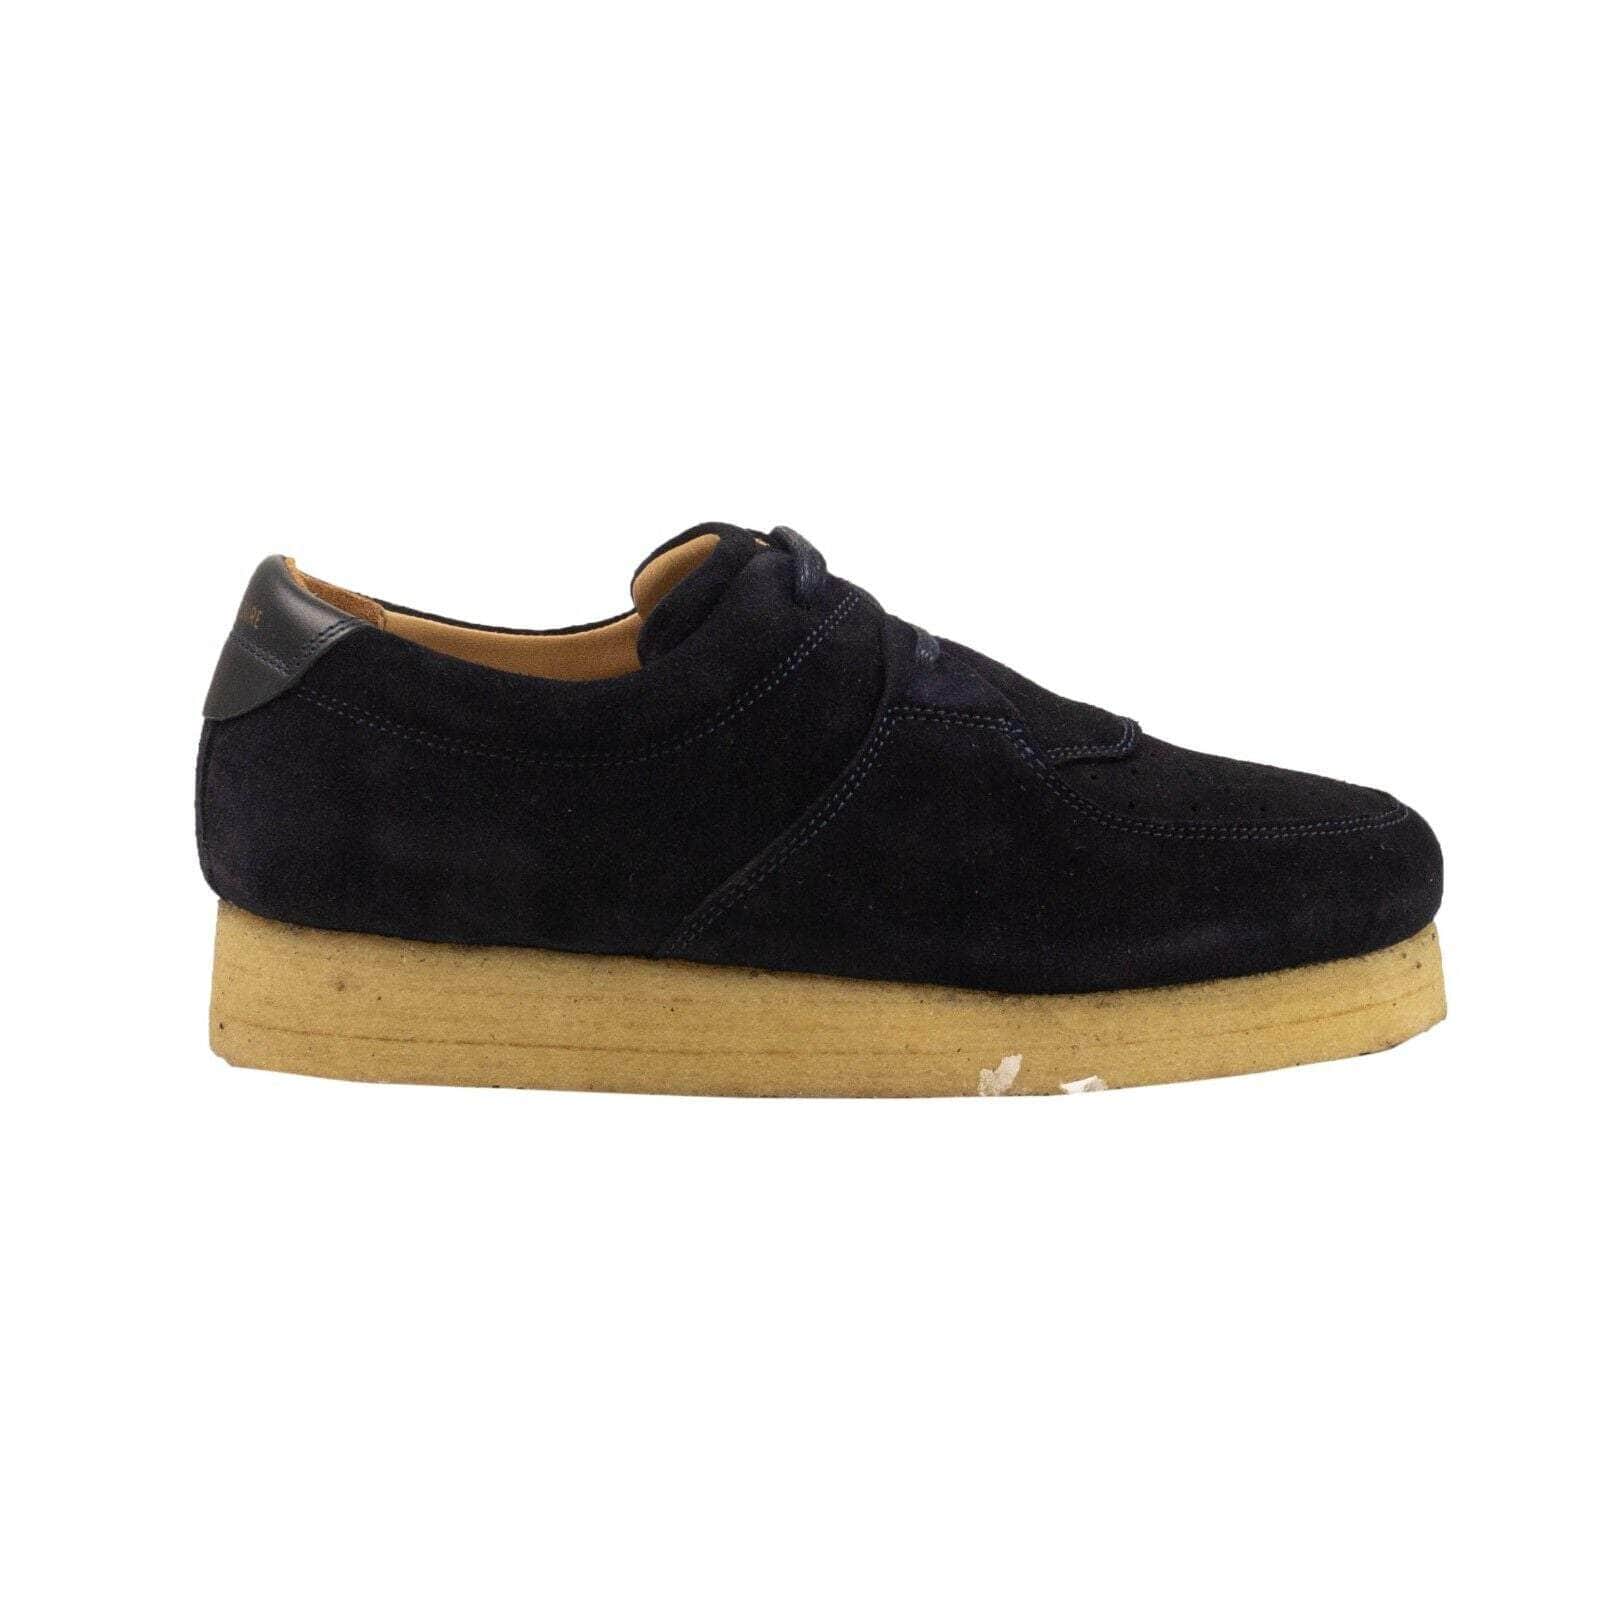 AIME LEON DORE aime-leon-dore, channelenable-all, chicmi, couponcollection, gender-mens, main-shoes, mens-oxfords-derby-shoes, mens-shoes, MixedApparel, size-7, size-8, under-250 7 / 09009_NAVY Black Q27 Suede Wallabe Shoes 95-ALD-2001/7 95-ALD-2001/7